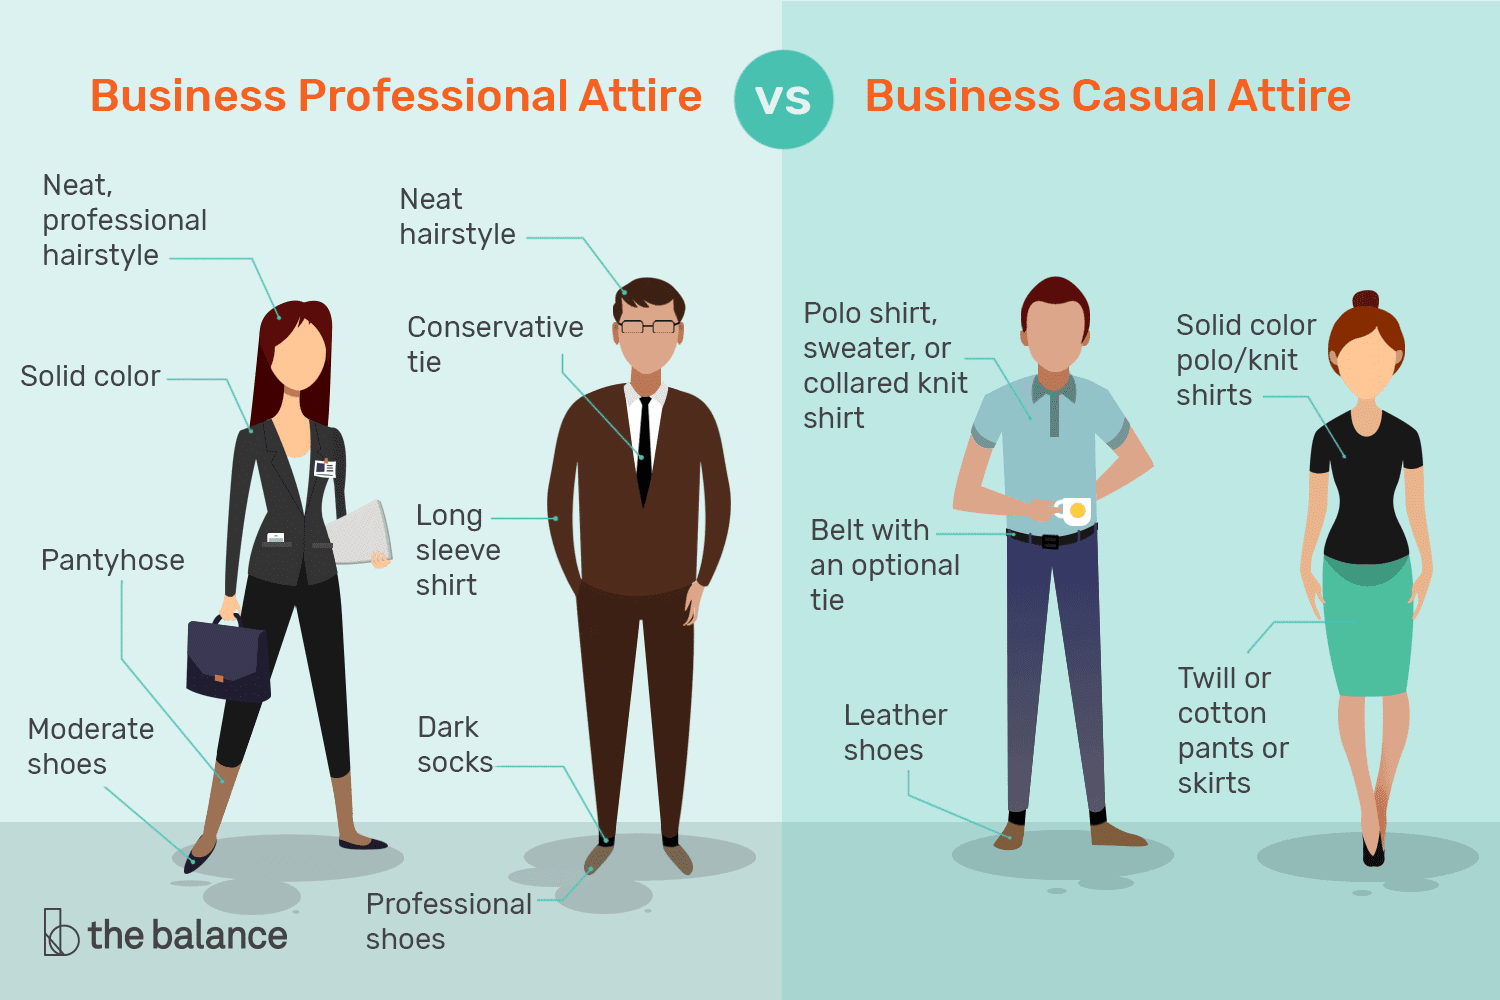 Infographic comparing business professional and business casual attire